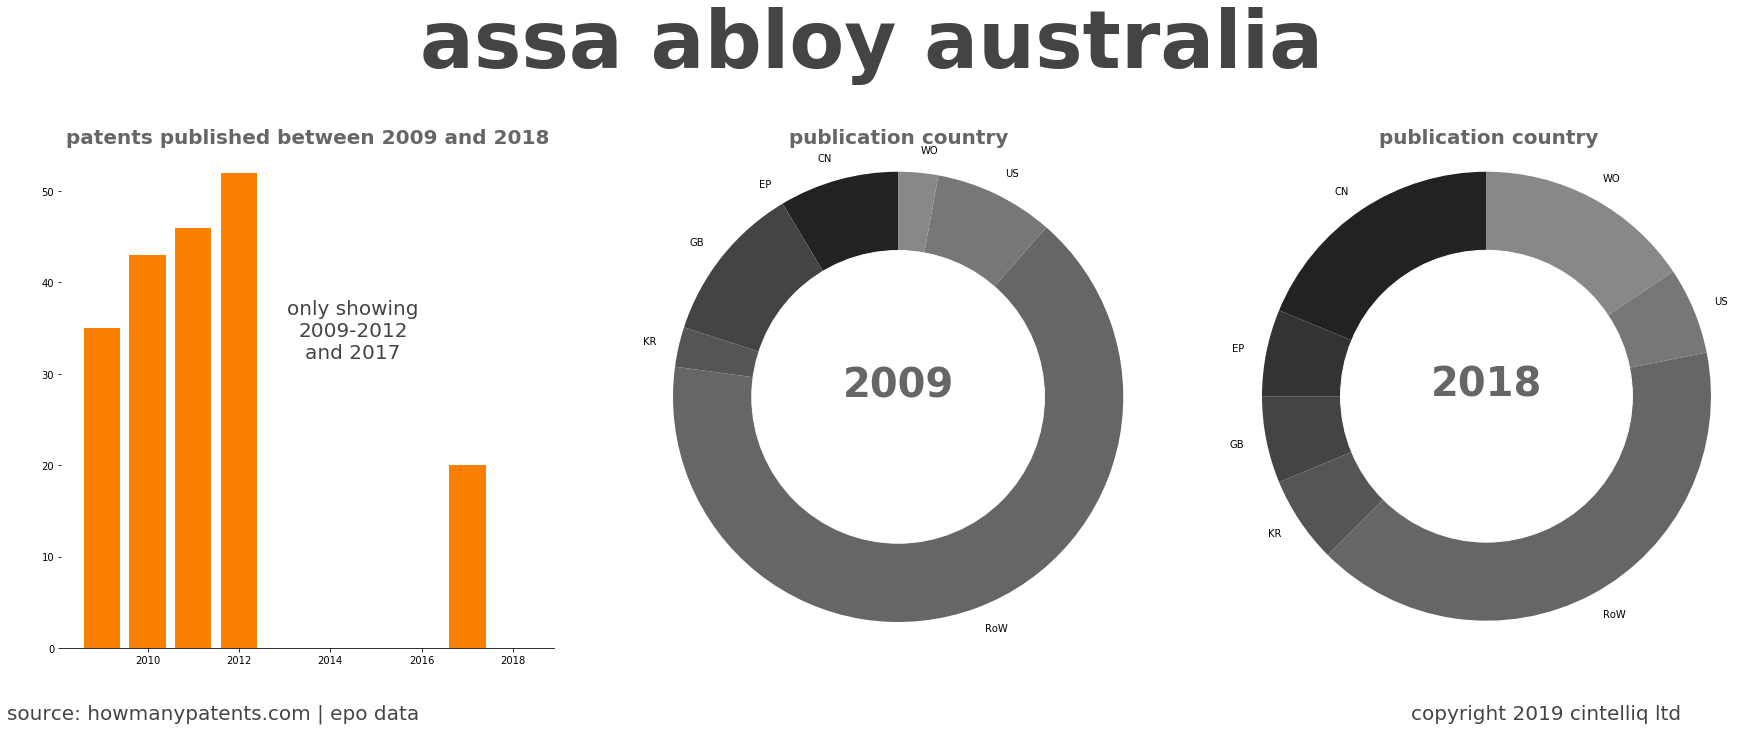 summary of patents for Assa Abloy Australia